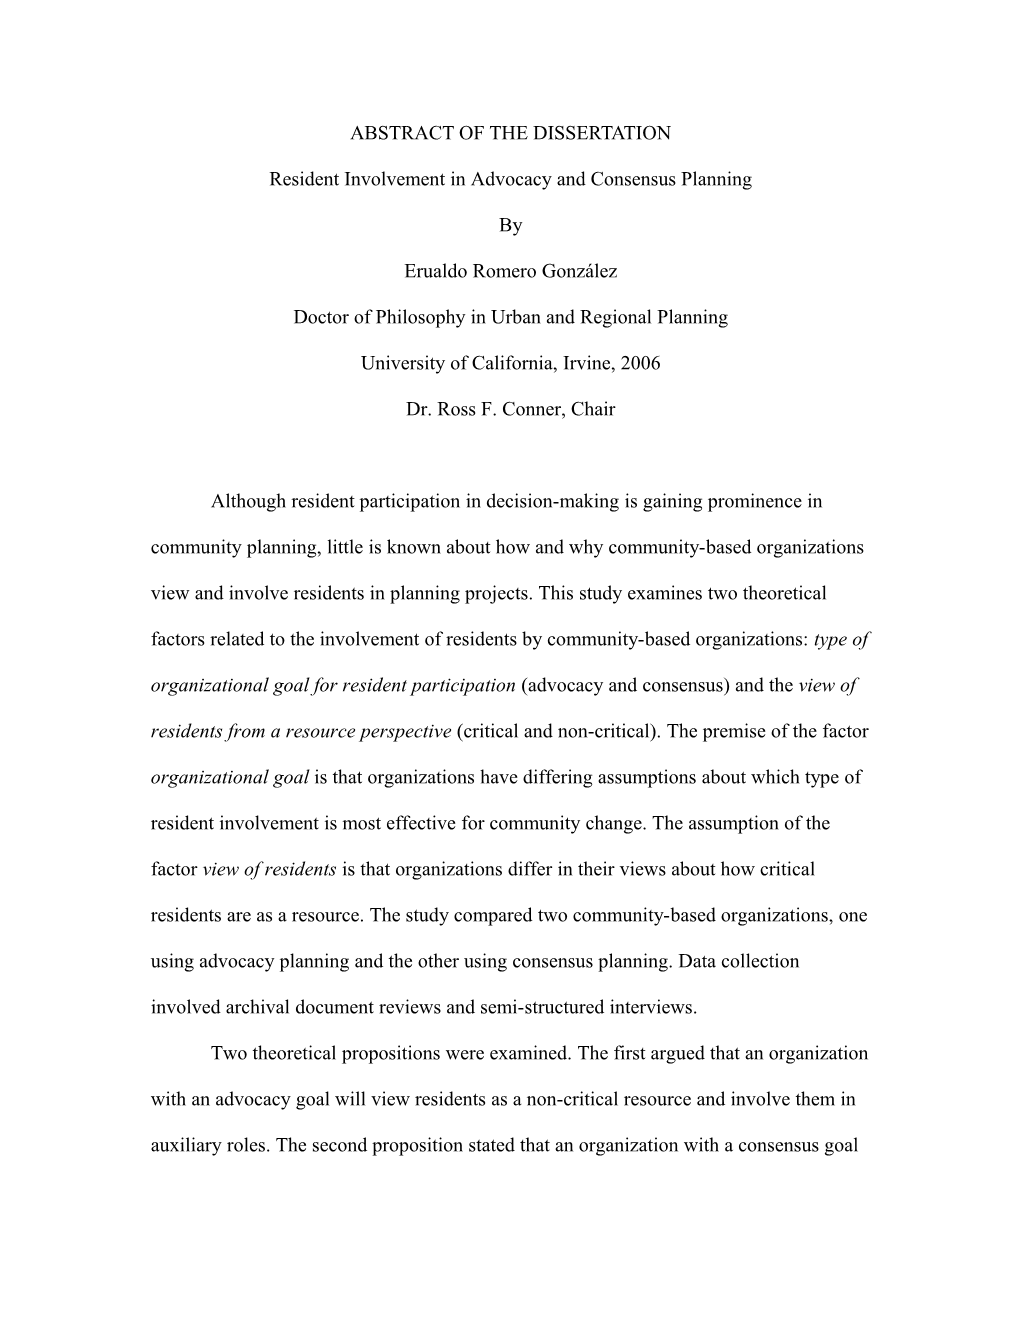 Abstract of the Dissertation s5